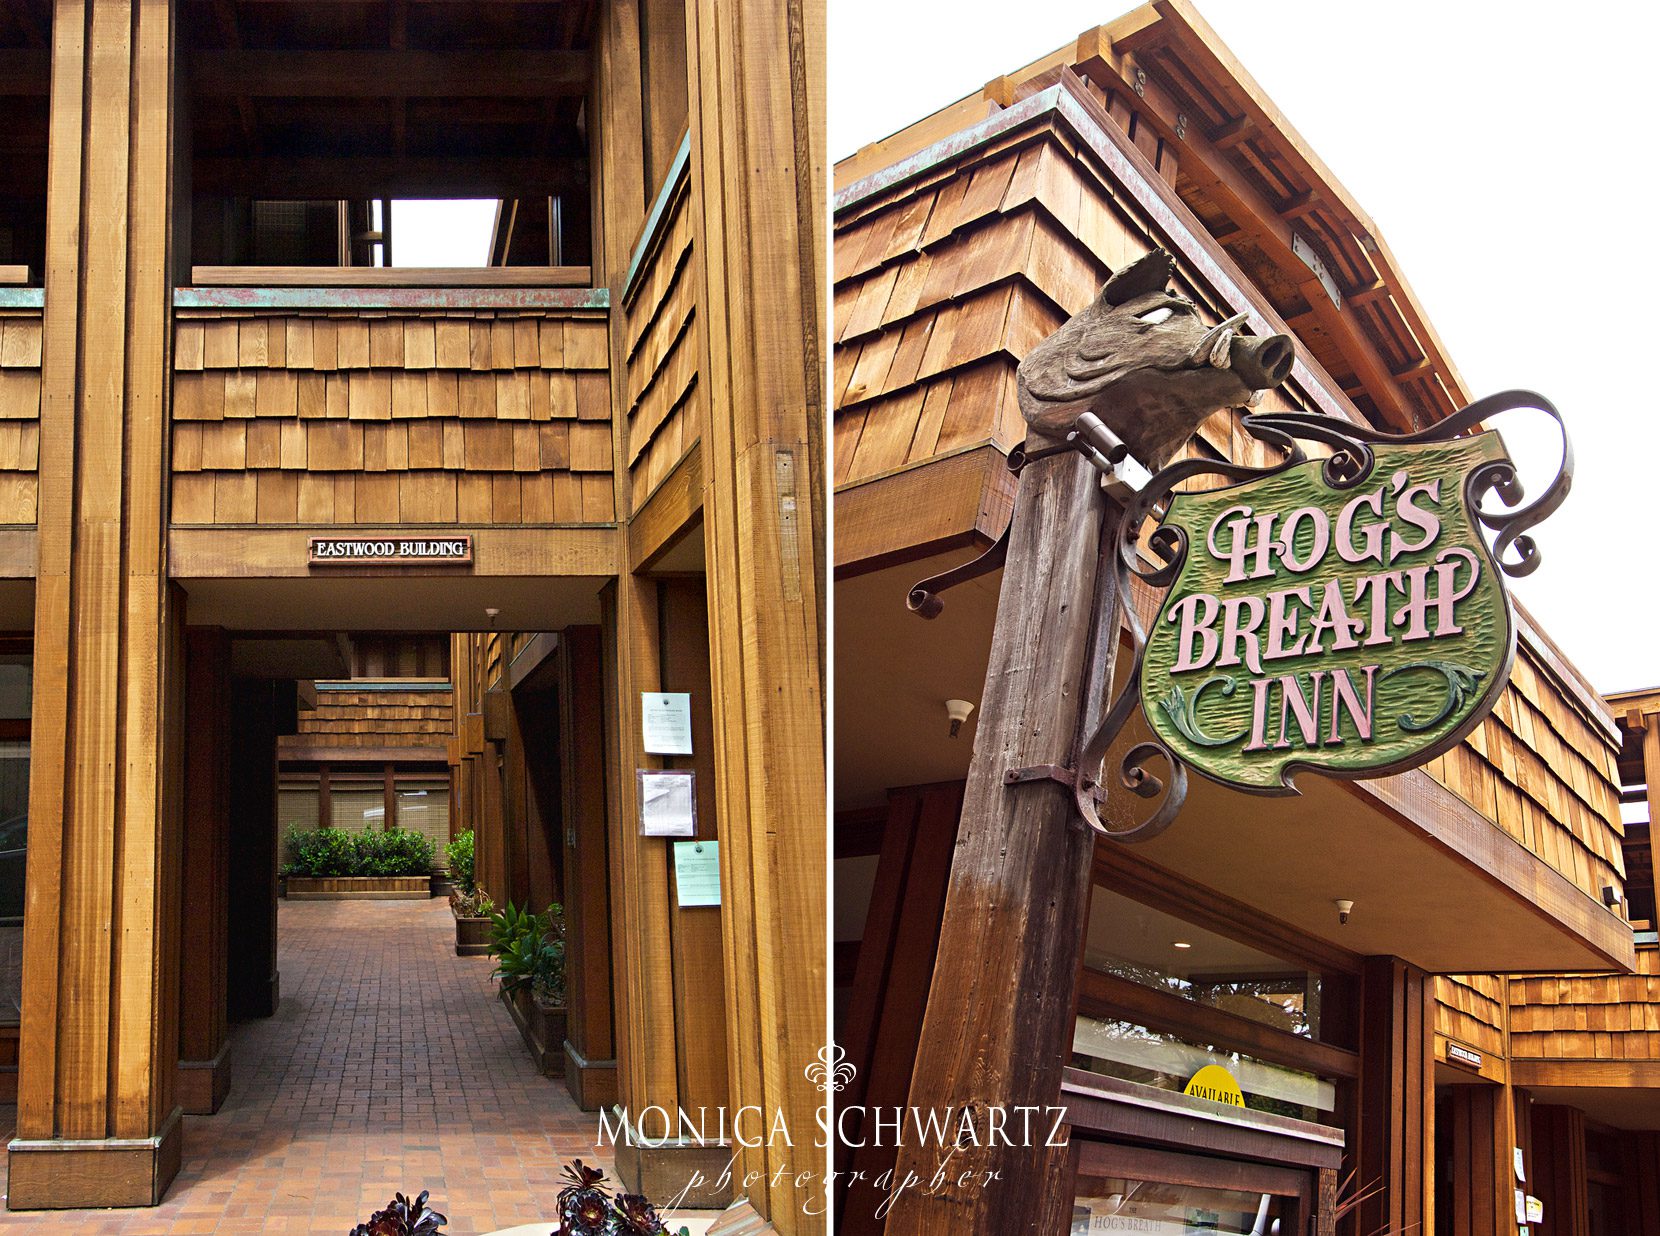 Eastwood-Building-and-Sign-for-the-Hogs-Breath-Inn-restaurant-in-Carmel-by-the-Sea-California